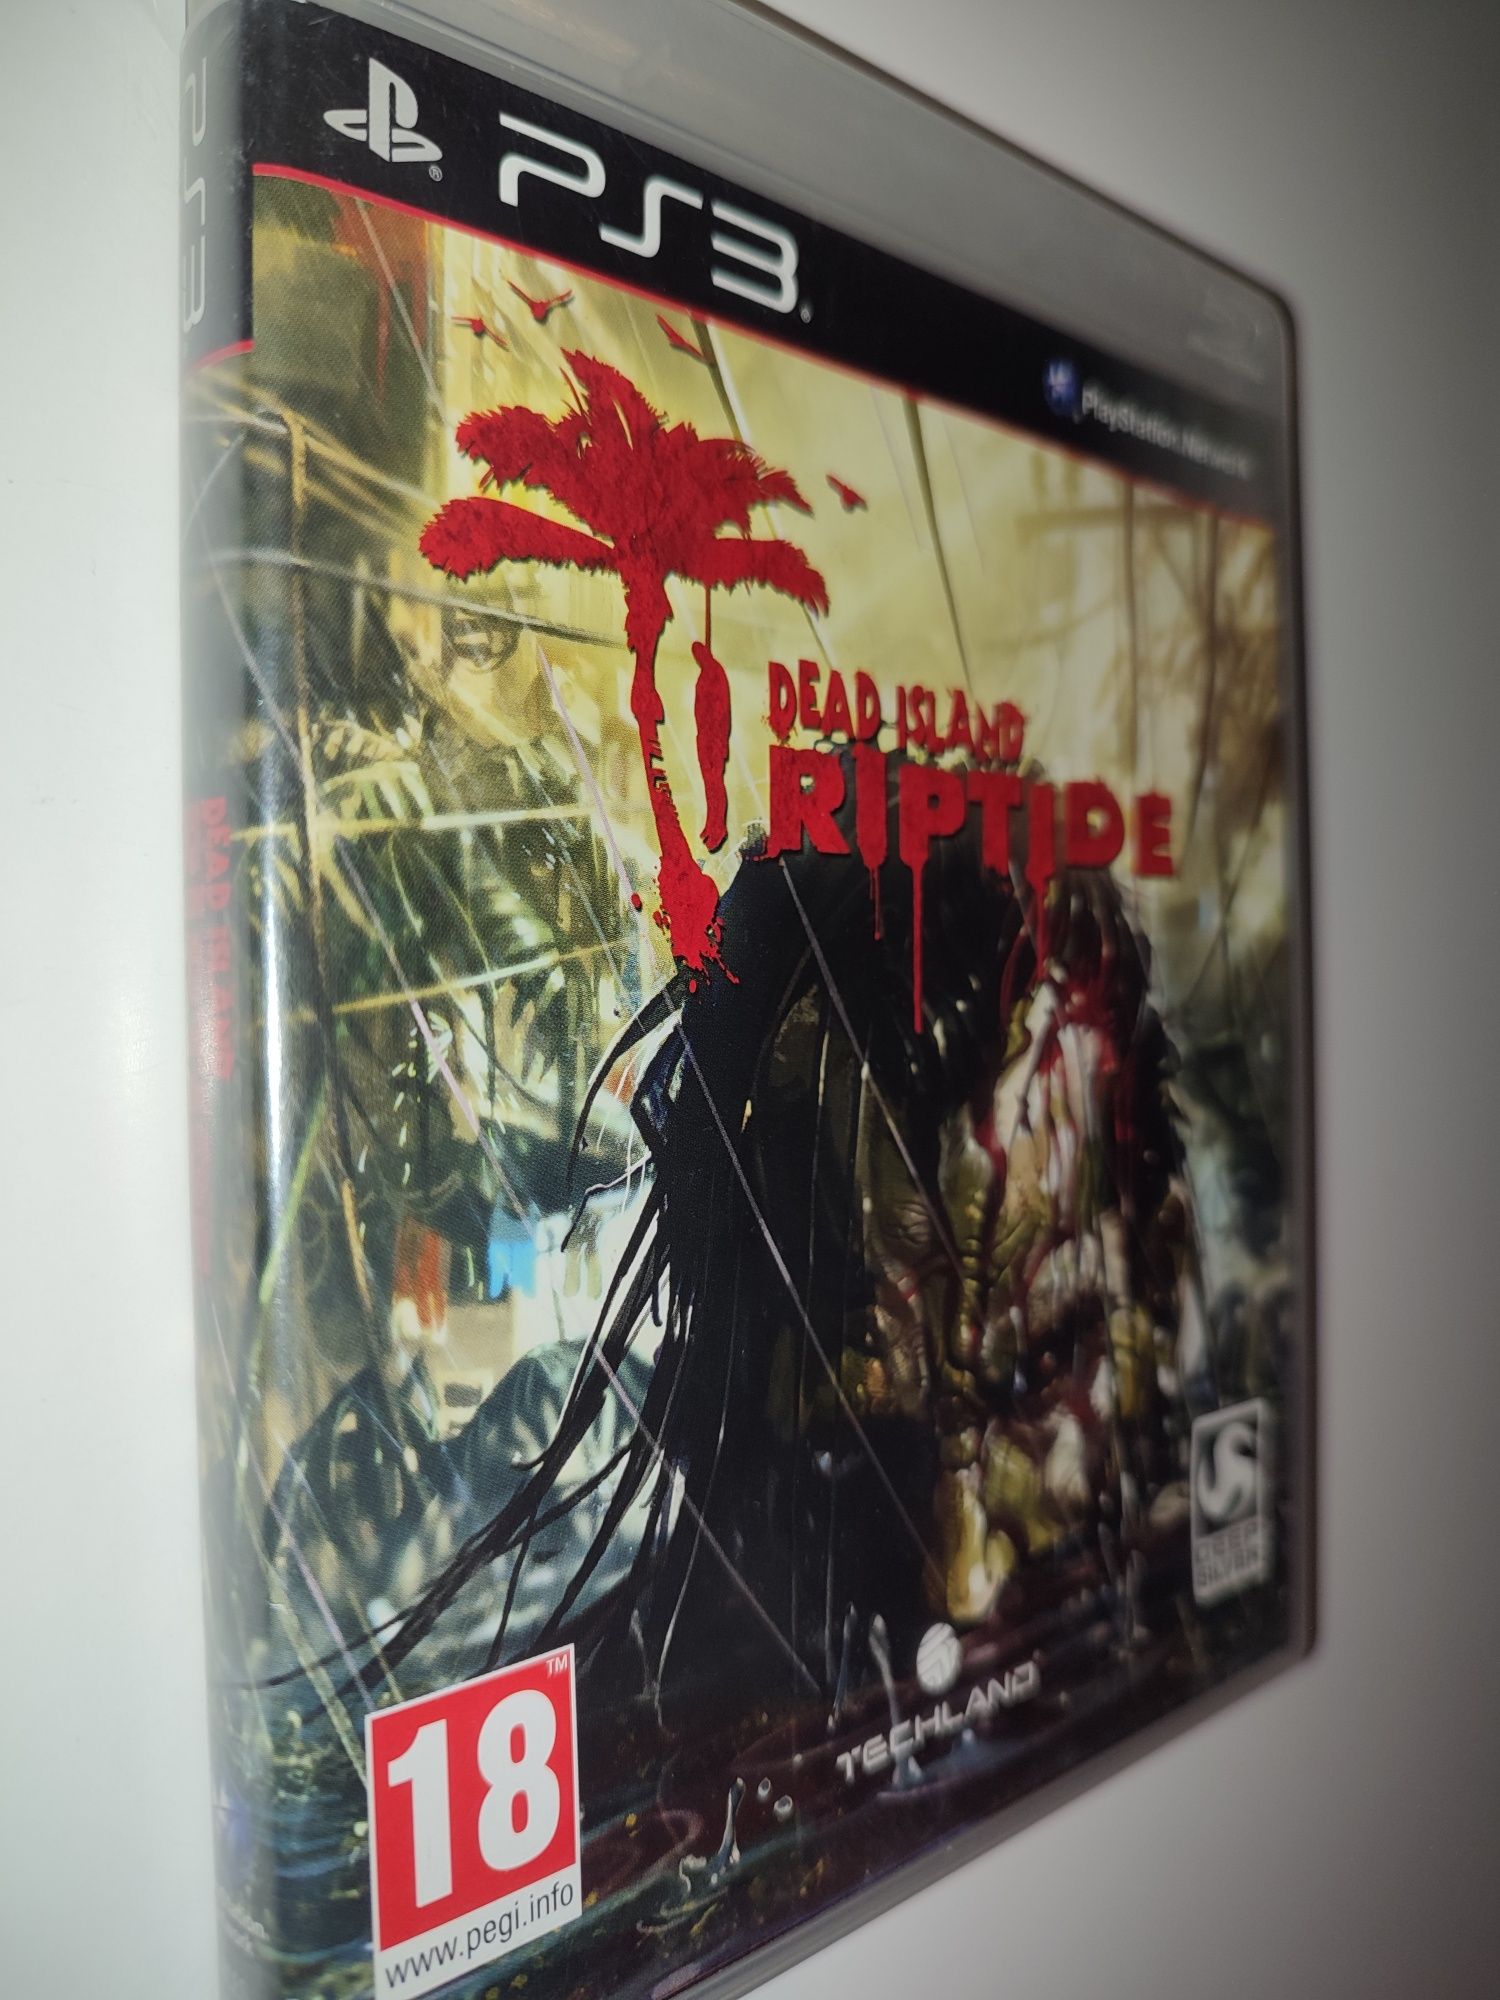 Gra Ps3 Dead Island Riptide gry PlayStation 3 Hit Sniper GOW UFC NFS